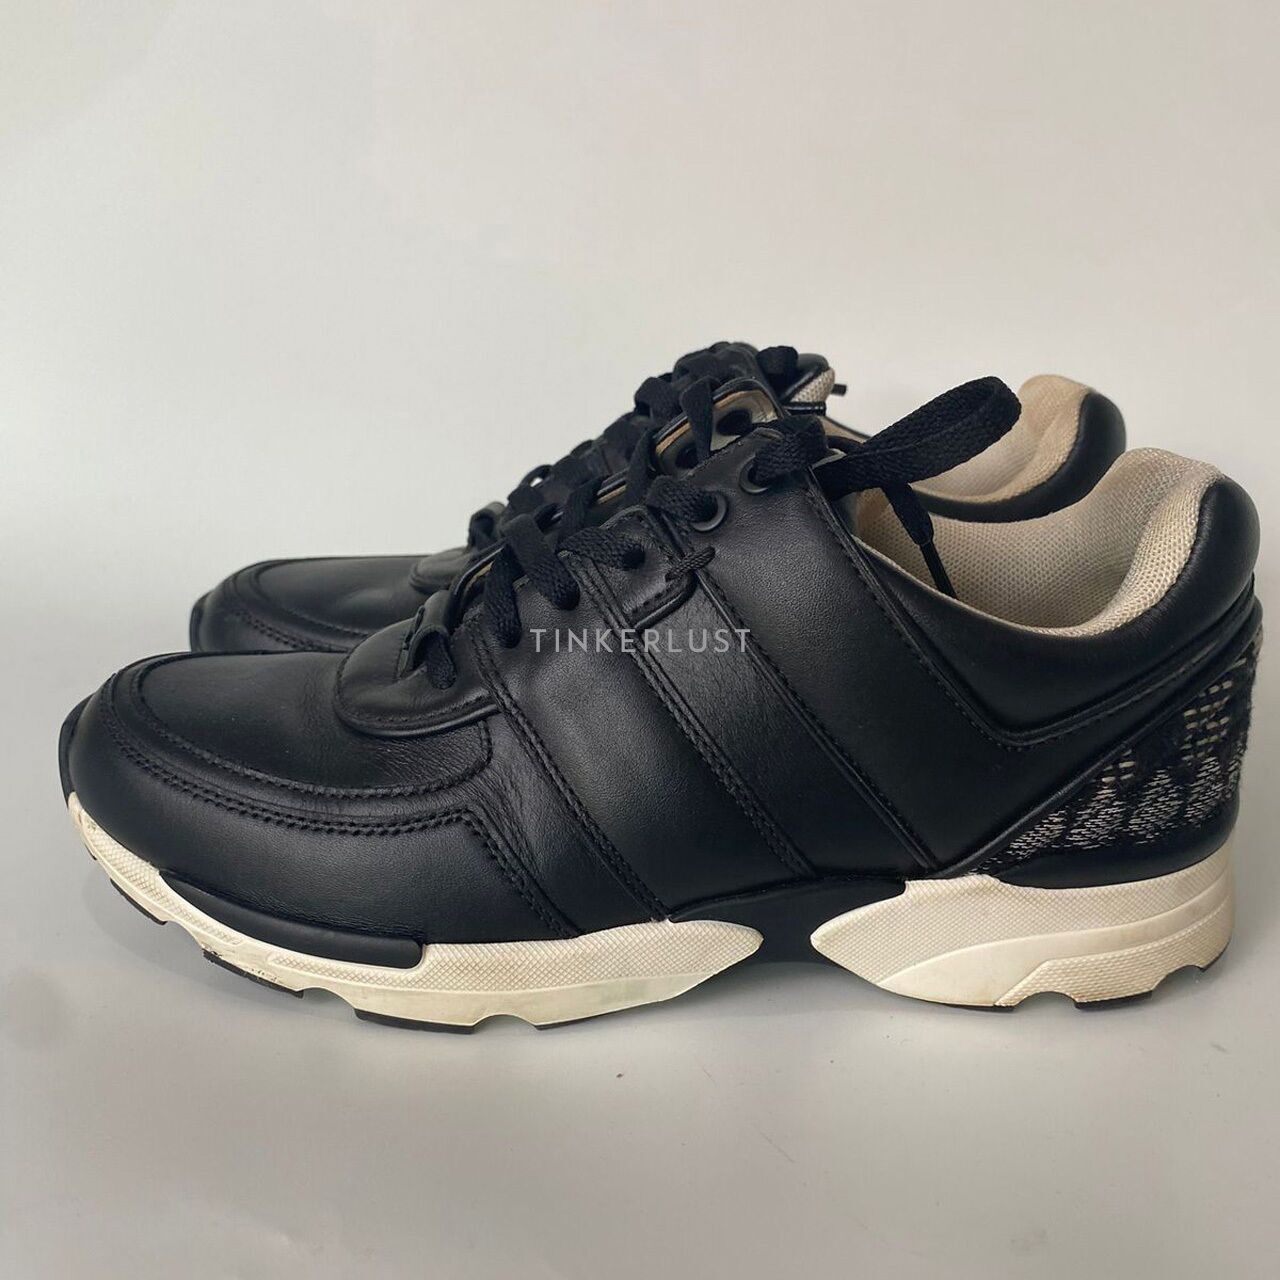 Chanel Black Leather Sneakers 